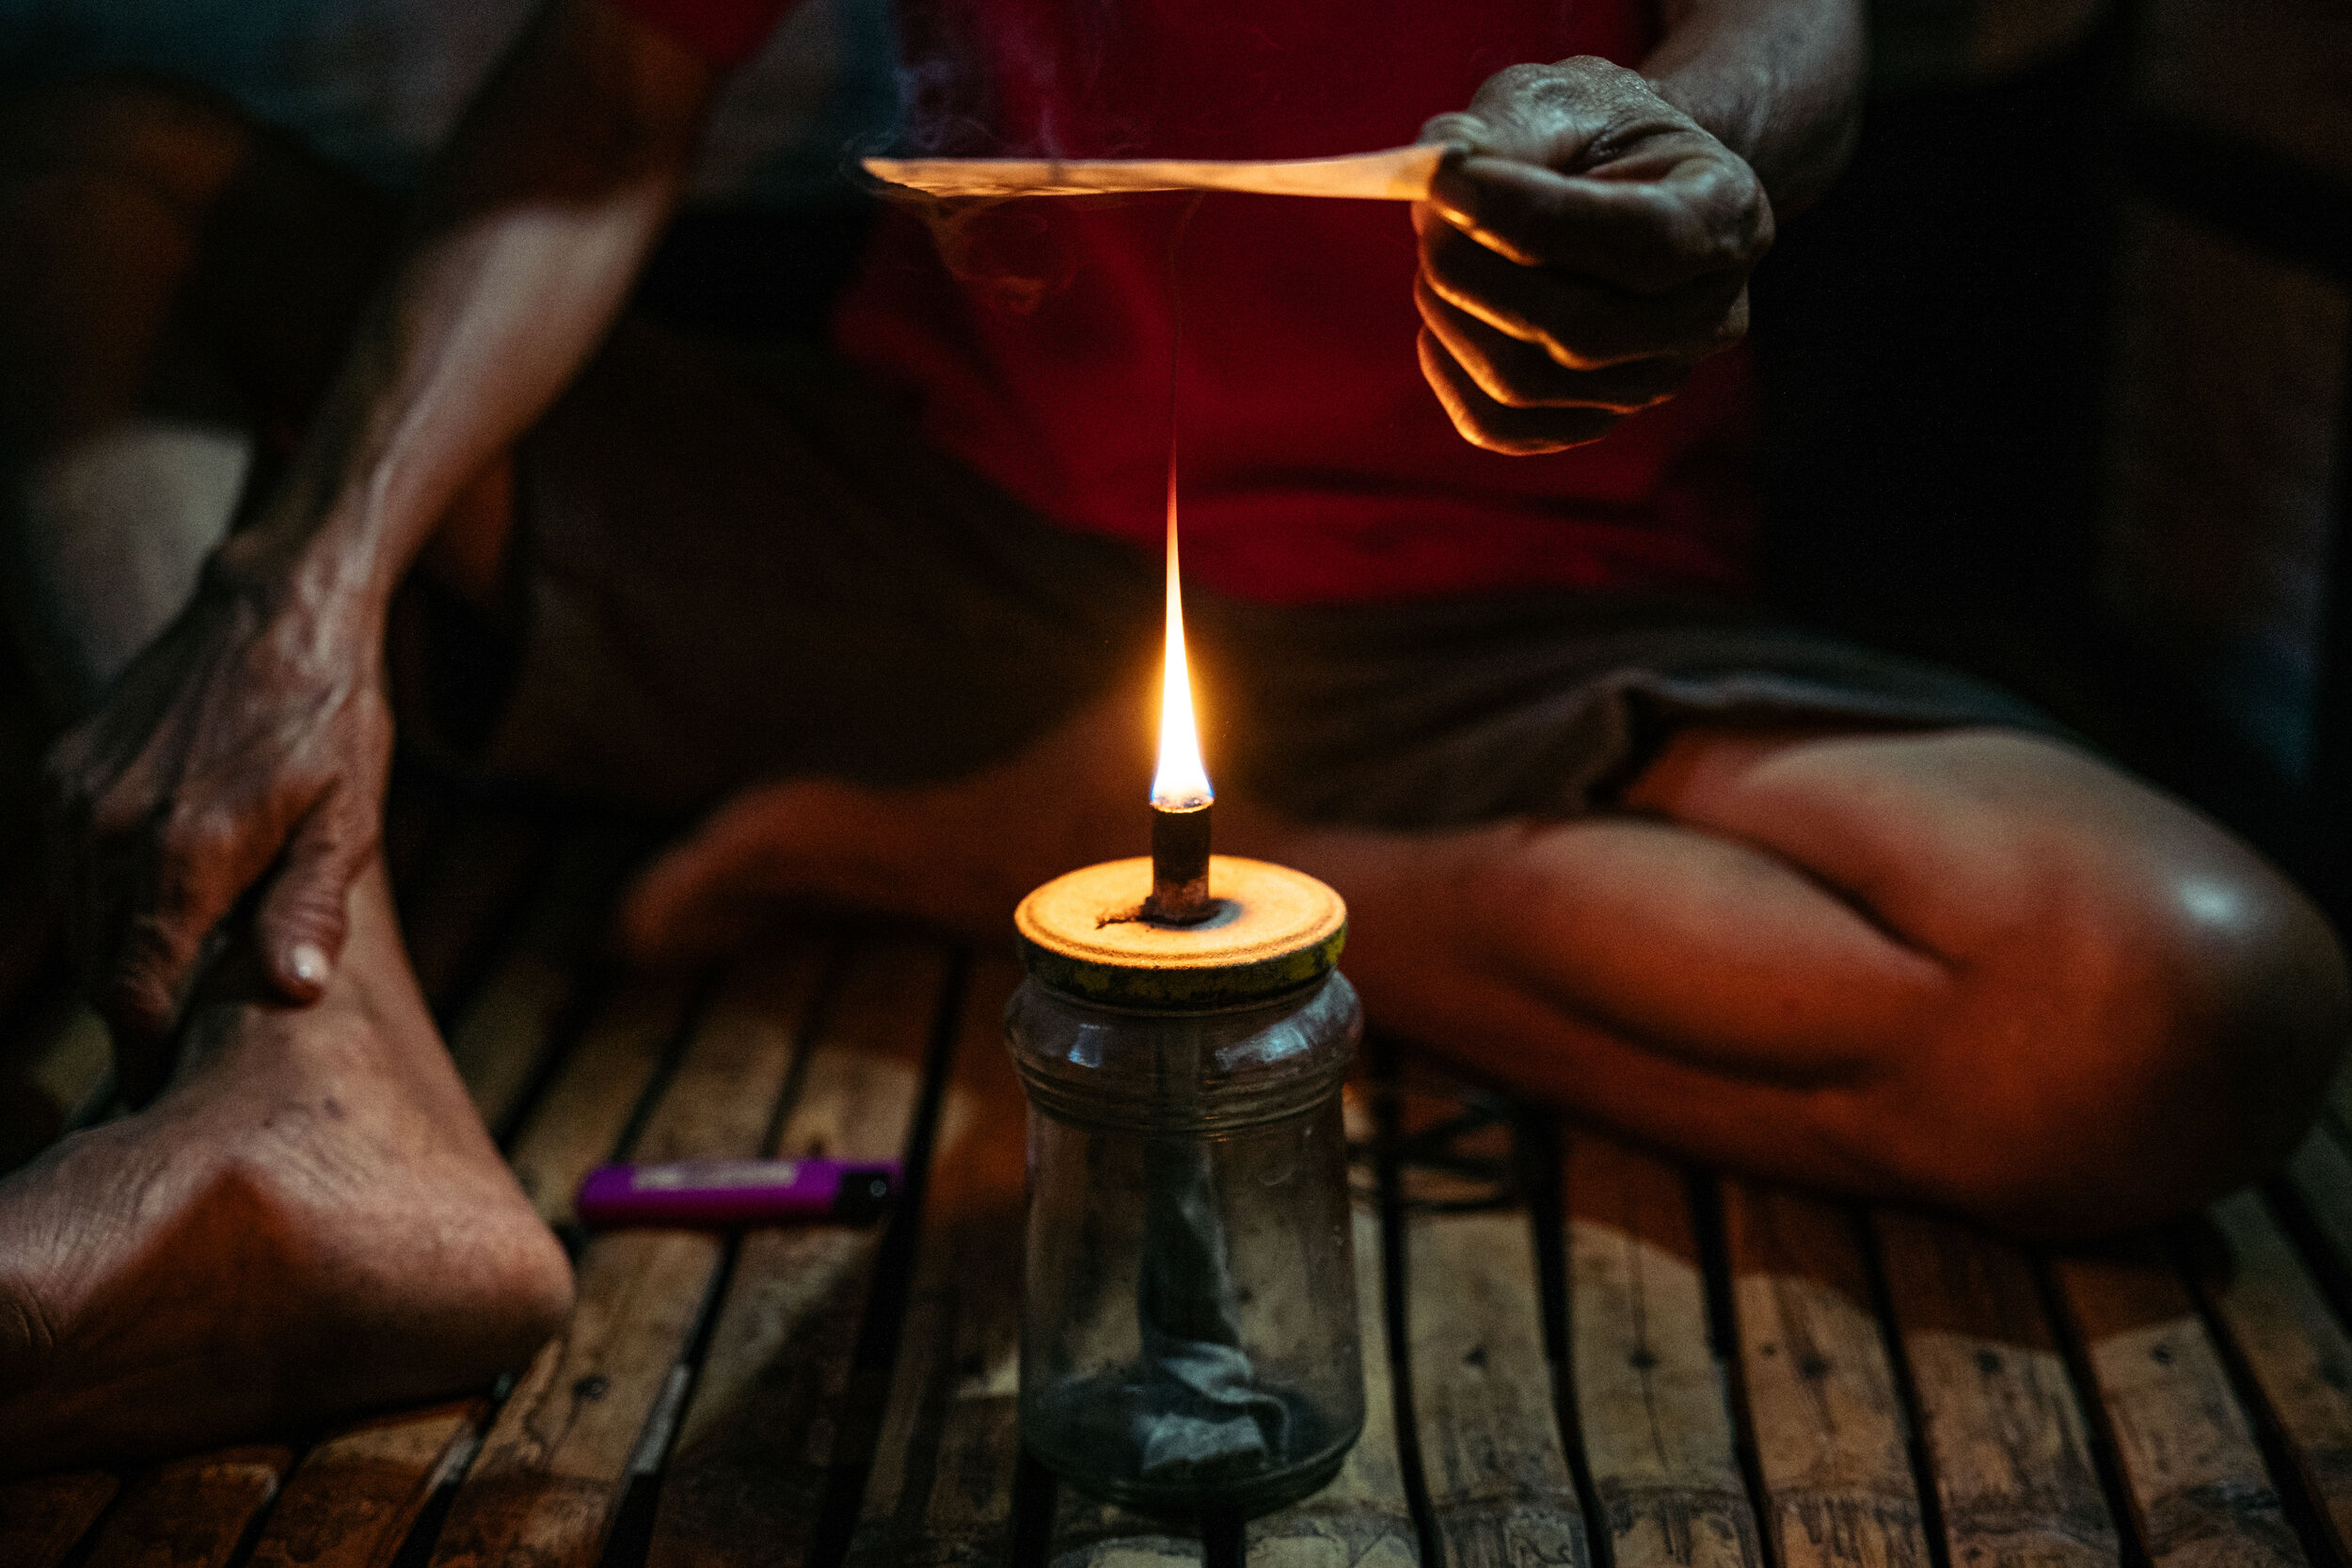  An alternative diagnostic ritual performed by healers to identify maladies involves hovering a blank paper over a gas lamp. According to Nida Cautidar, the resulting burnt formations suggest that the sick person has unconsciously disturbed dwelling 